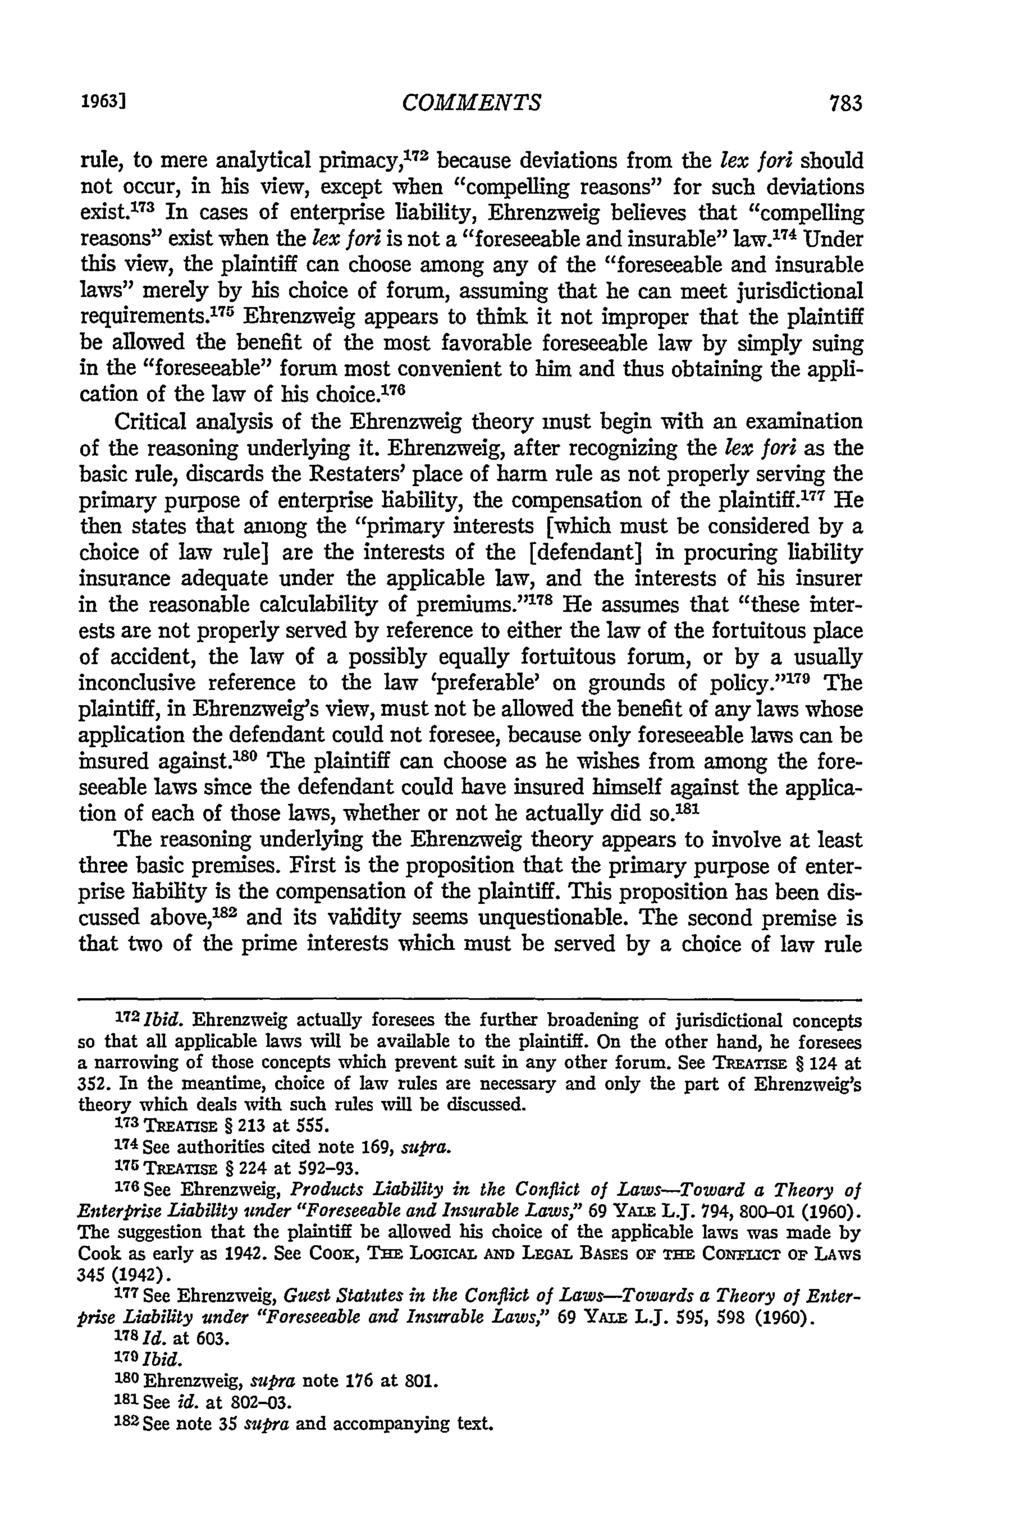 19631 COMMENTS rule, to mere analytical primacy, 72 because deviations from the lex fori should not occur, in his view, except when "compelling reasons" for such deviations exist.